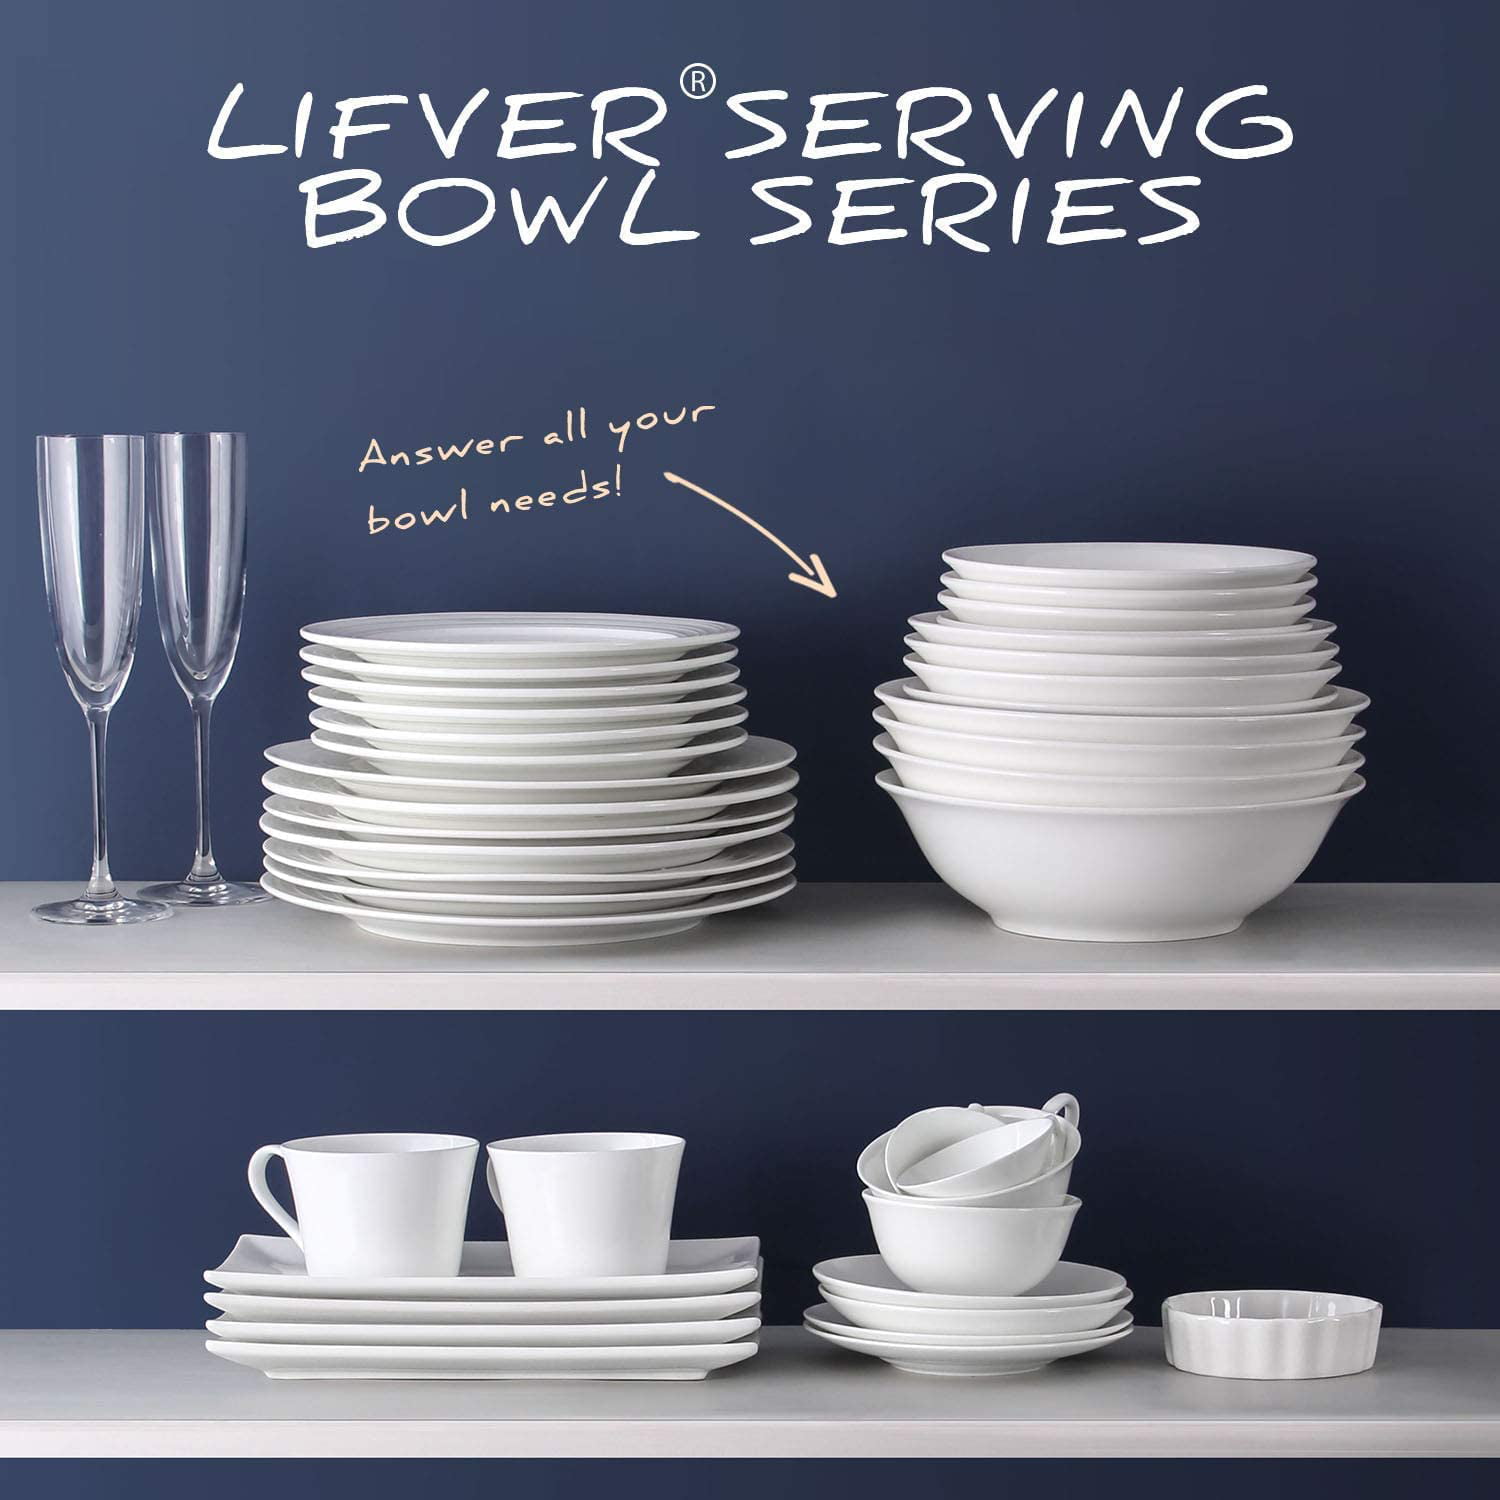 Williams Sonoma Pantry Soup Bowls with Handles, Set of 6